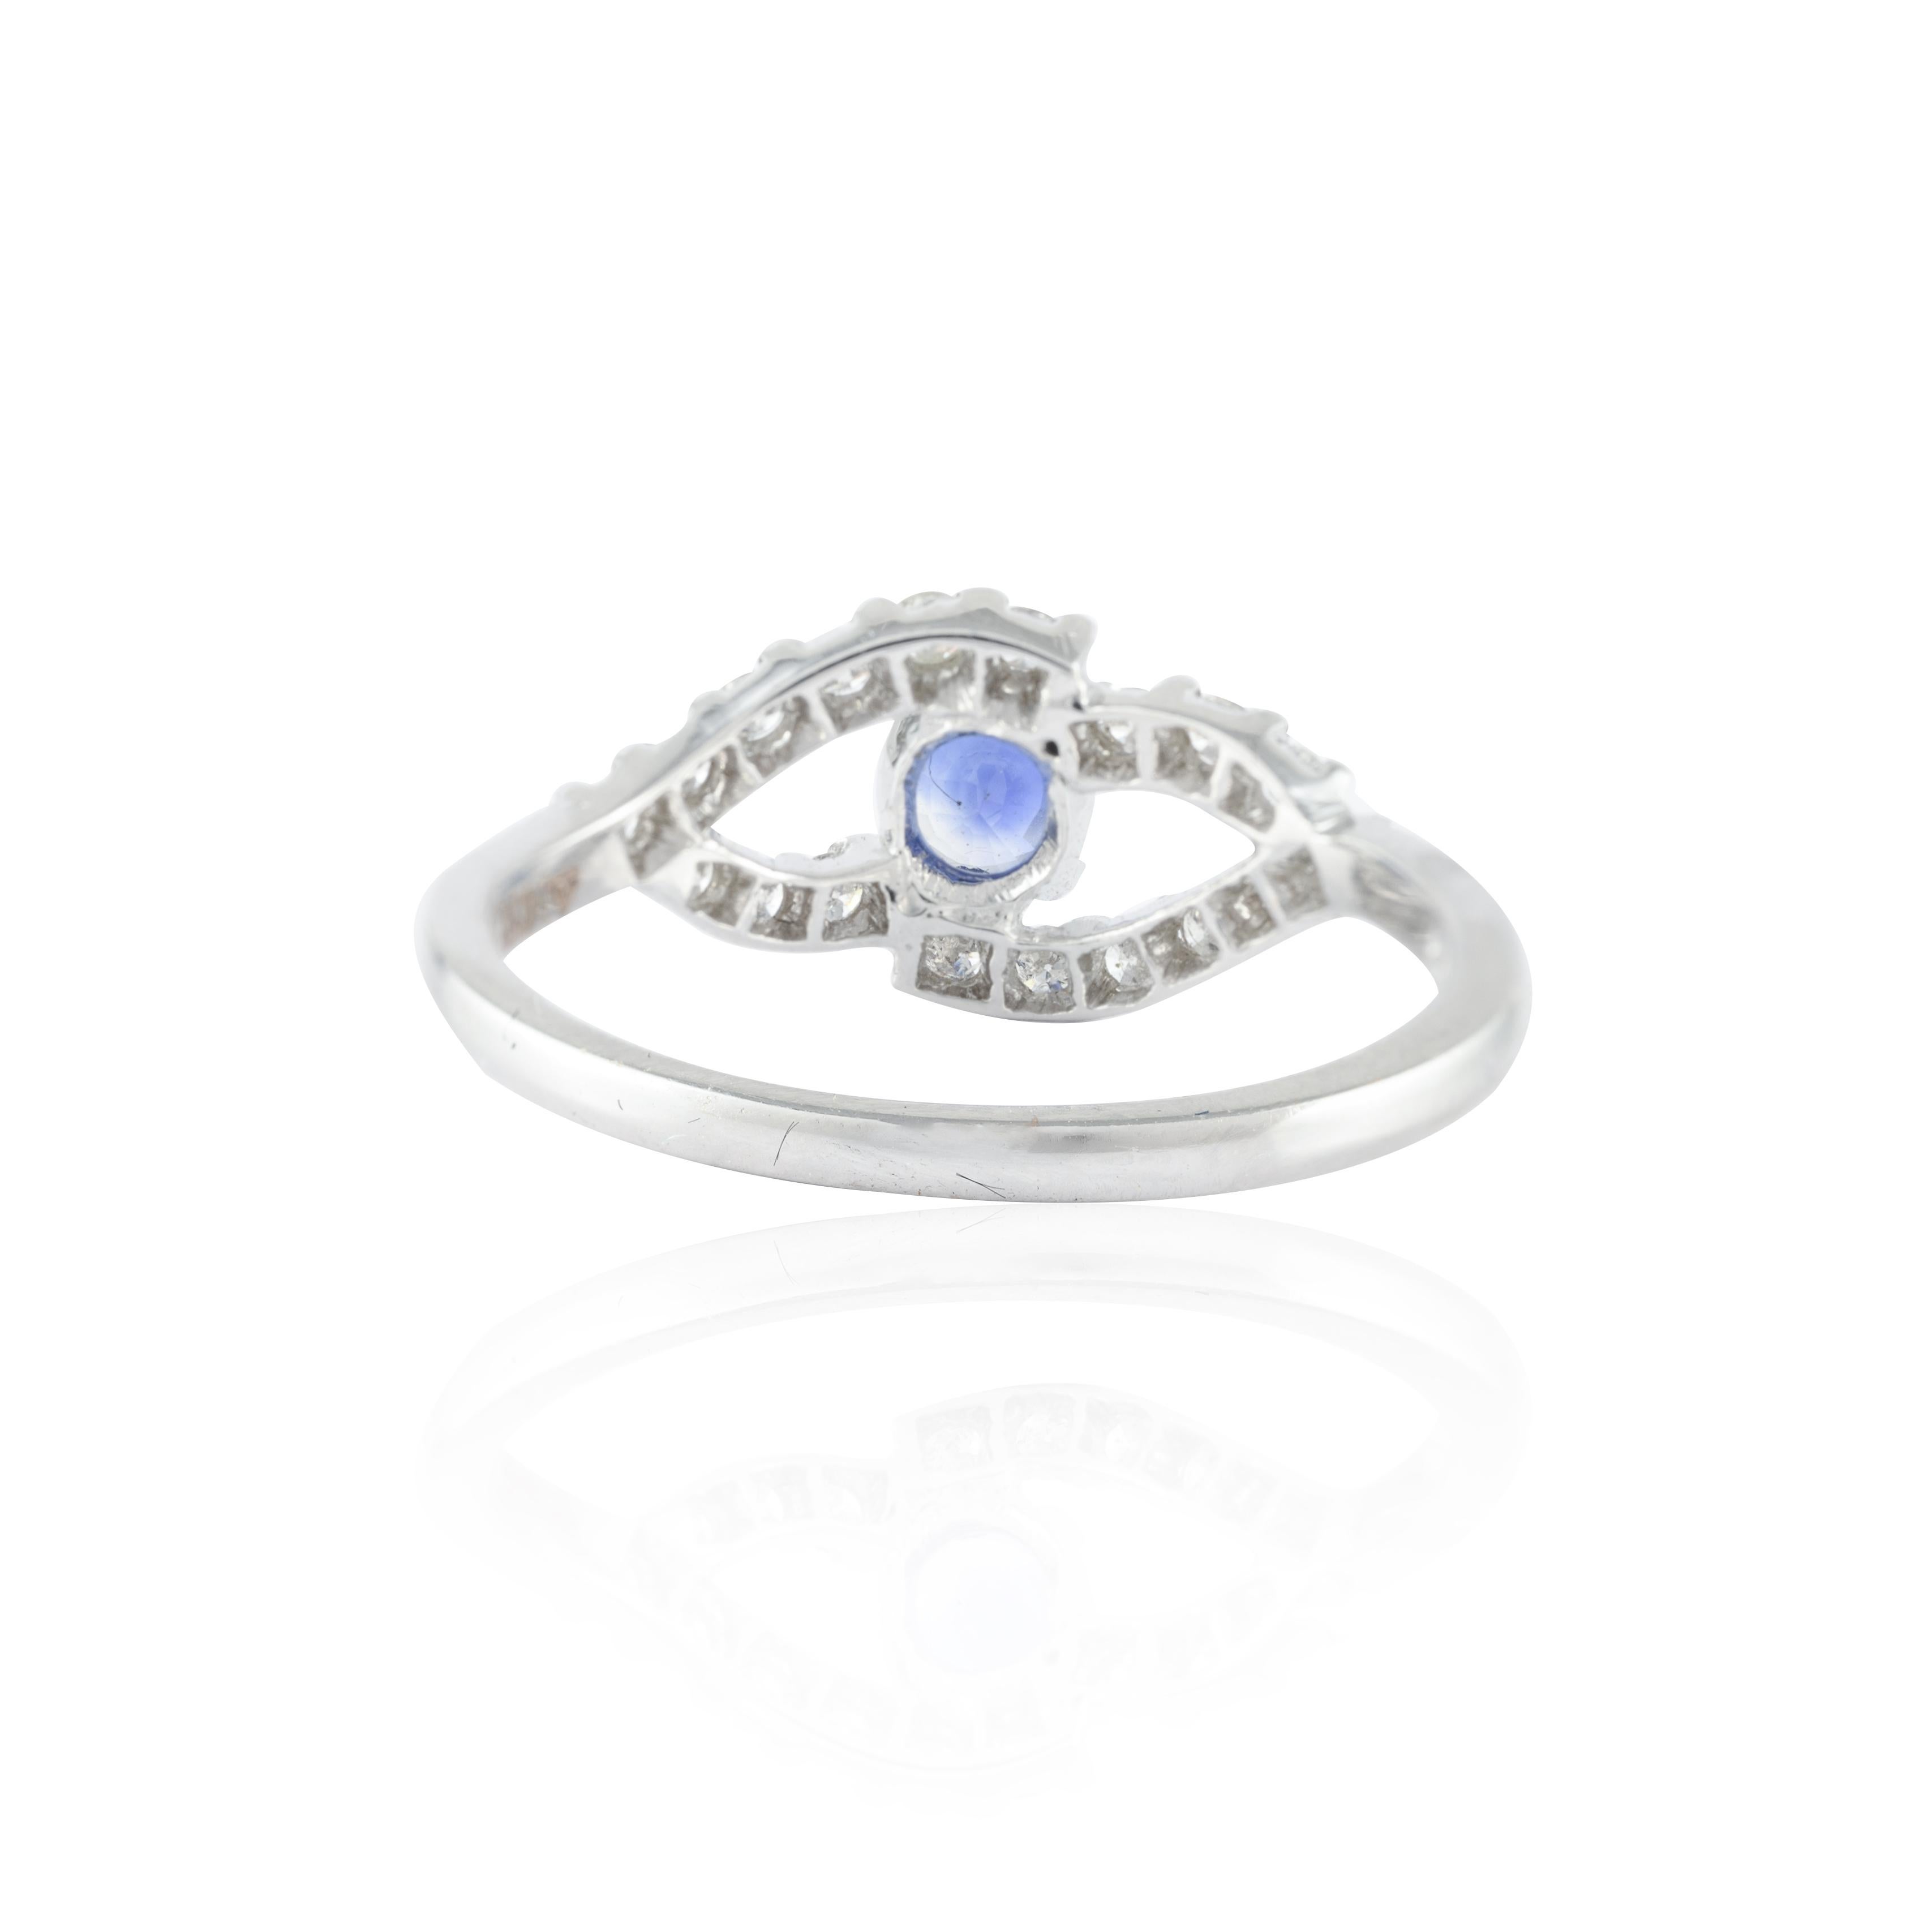 For Sale:  Alluring Blue Sapphire Ring with Diamonds Set in 14K Solid White Gold 7